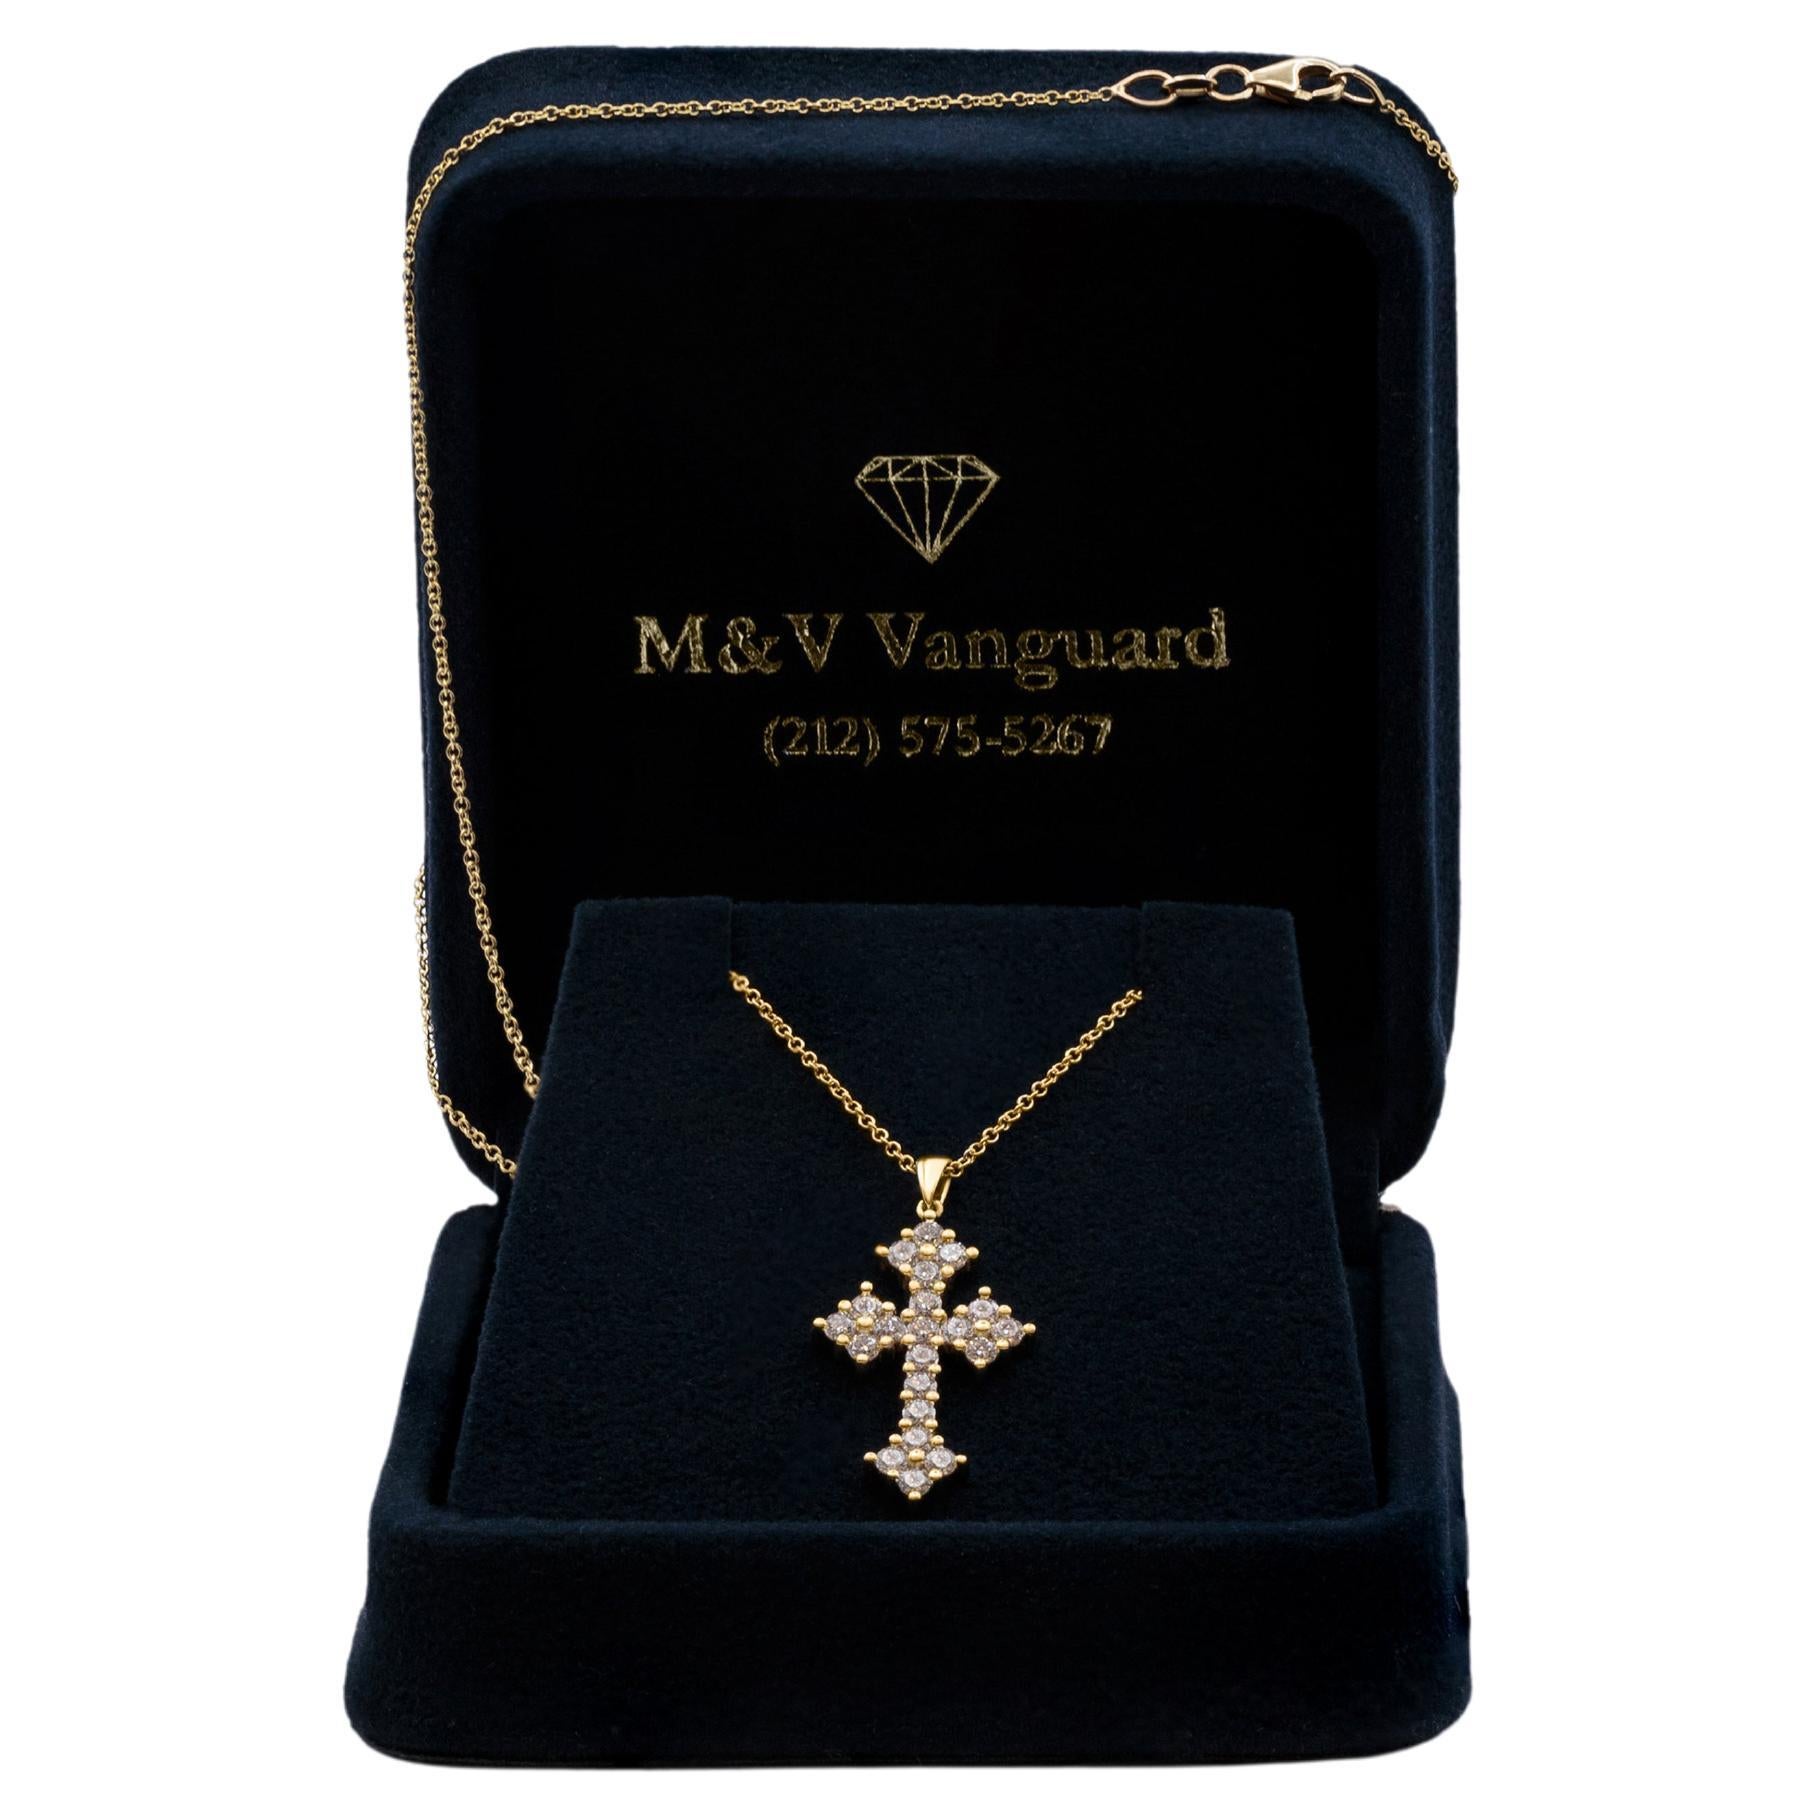 Diamond Cross Necklace in 14K Yellow Gold
on 16'' chain
total carat weight is 0.90ct F/G color and VS clarity natural diamonds
